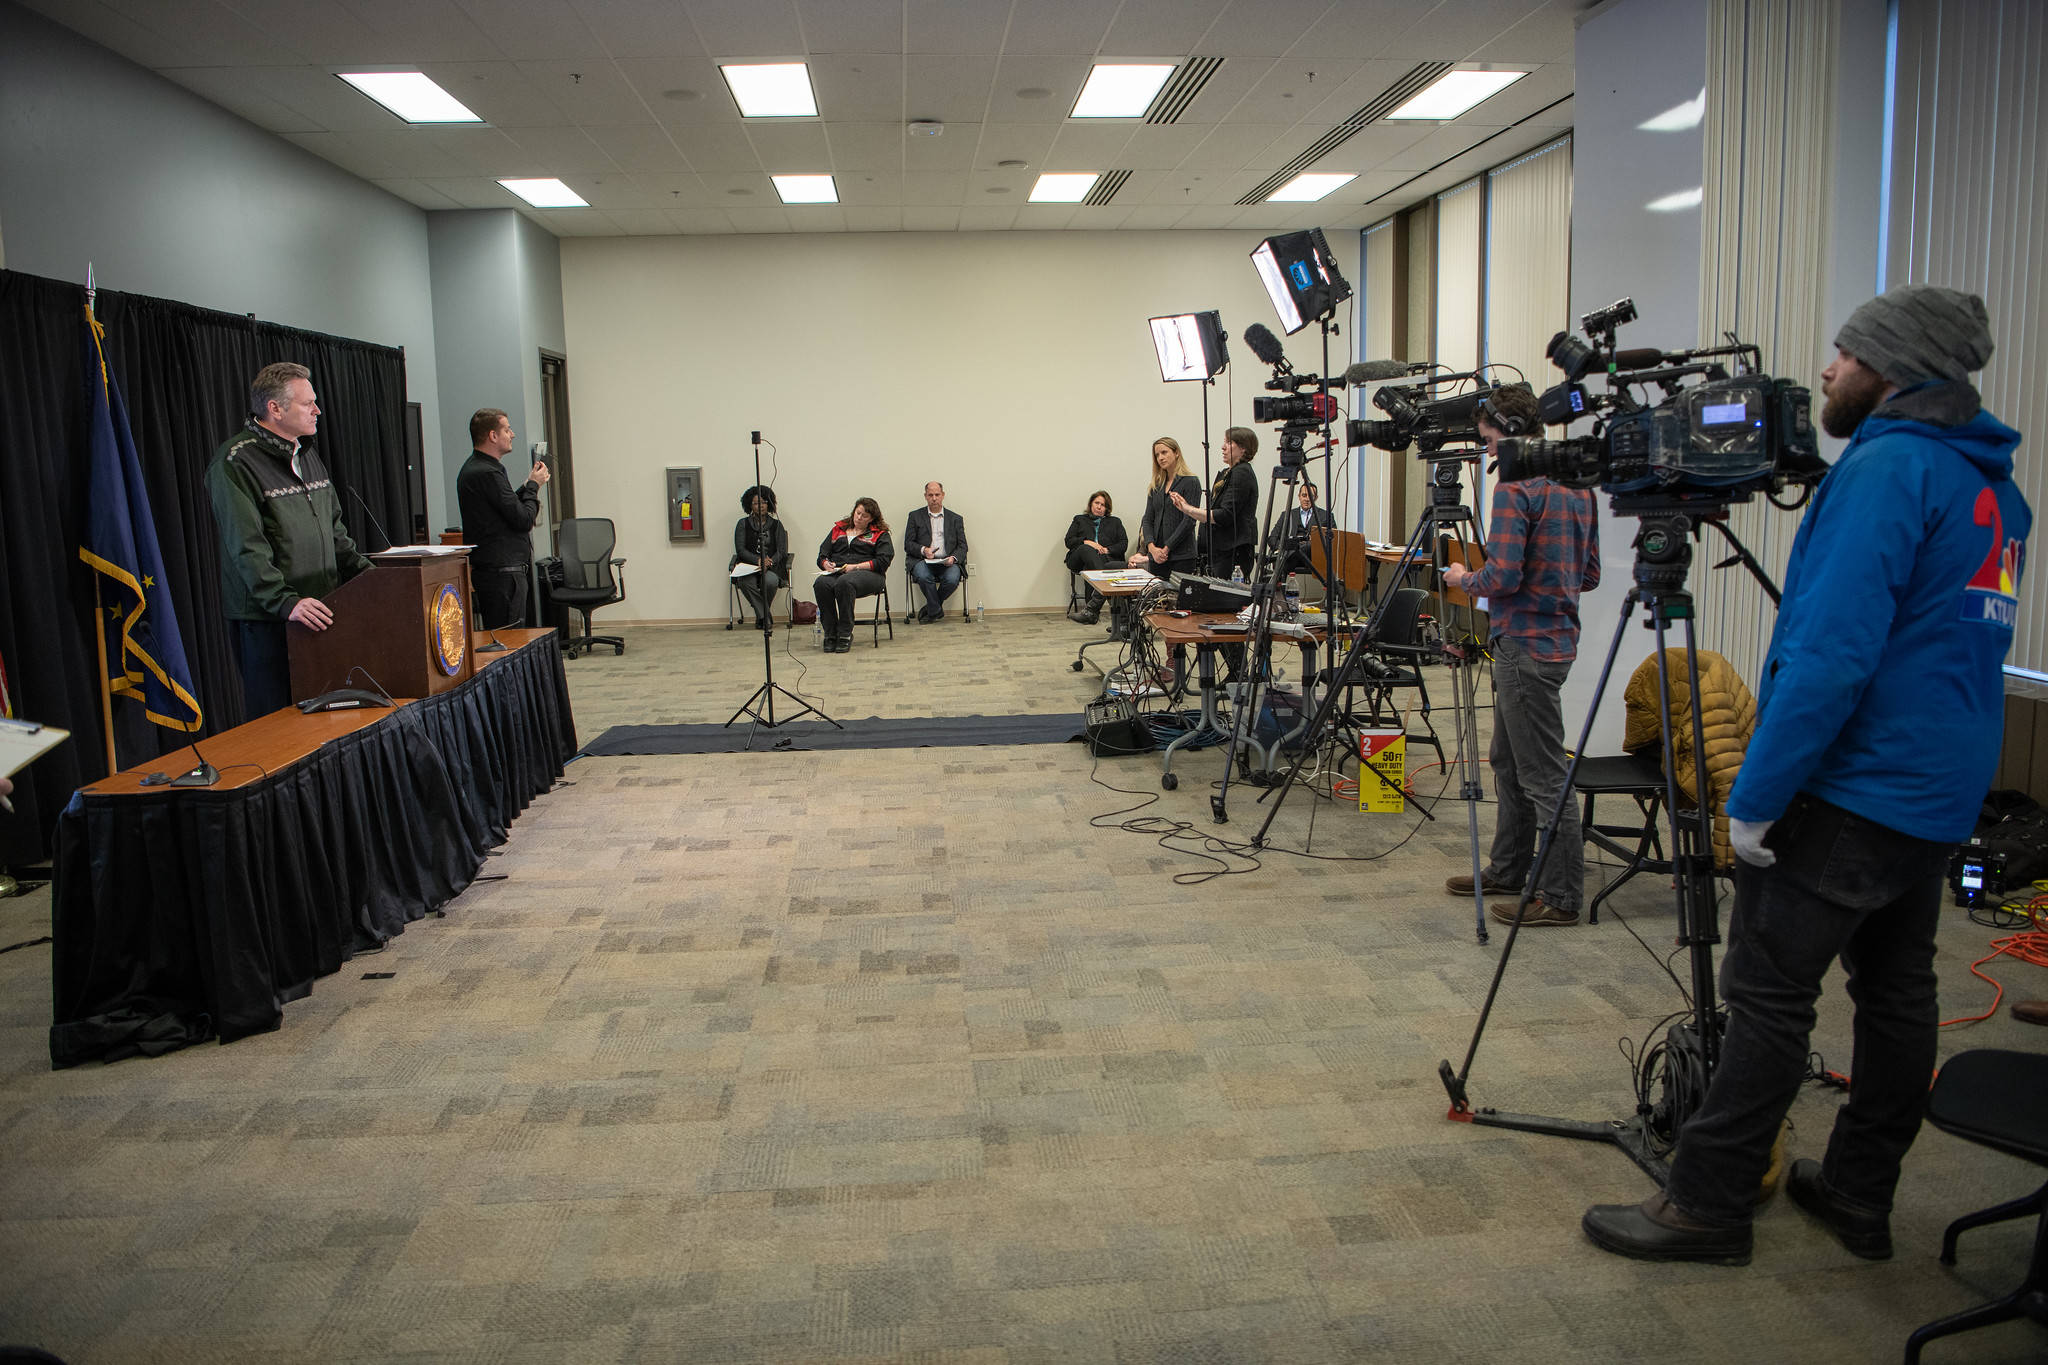 Gov. Mike Dunleavy at a press conference in Anchorage on Tuesday, March 31, 2020. (Courtesy photo | Office of Gov. Mike Dunleavy)